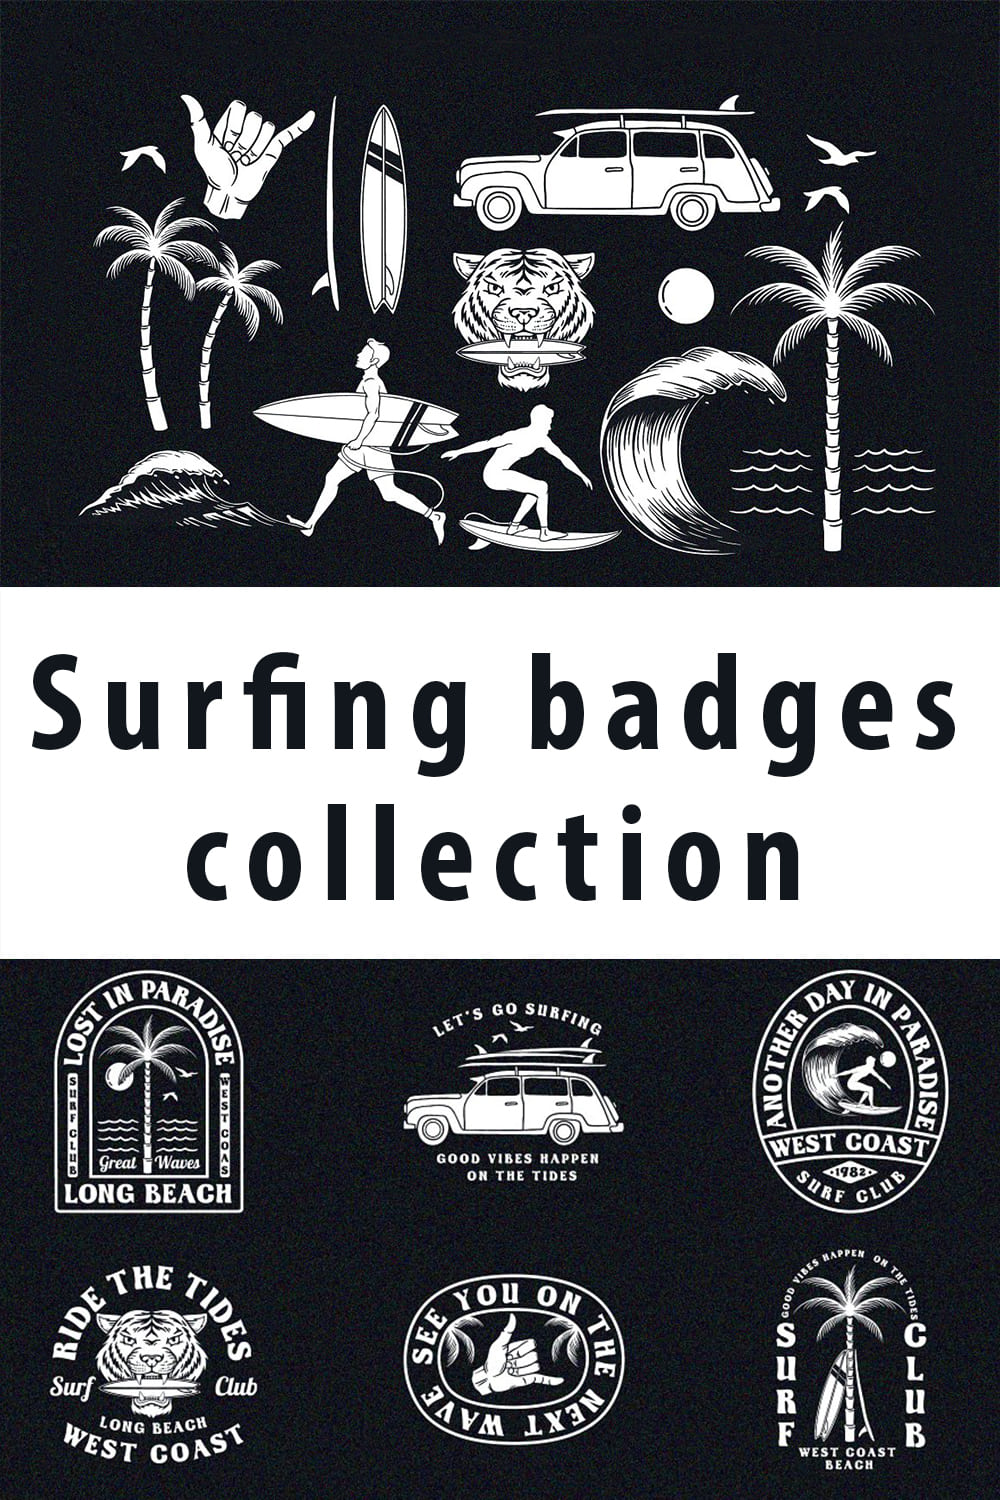 Black and white logos for surfing topic.